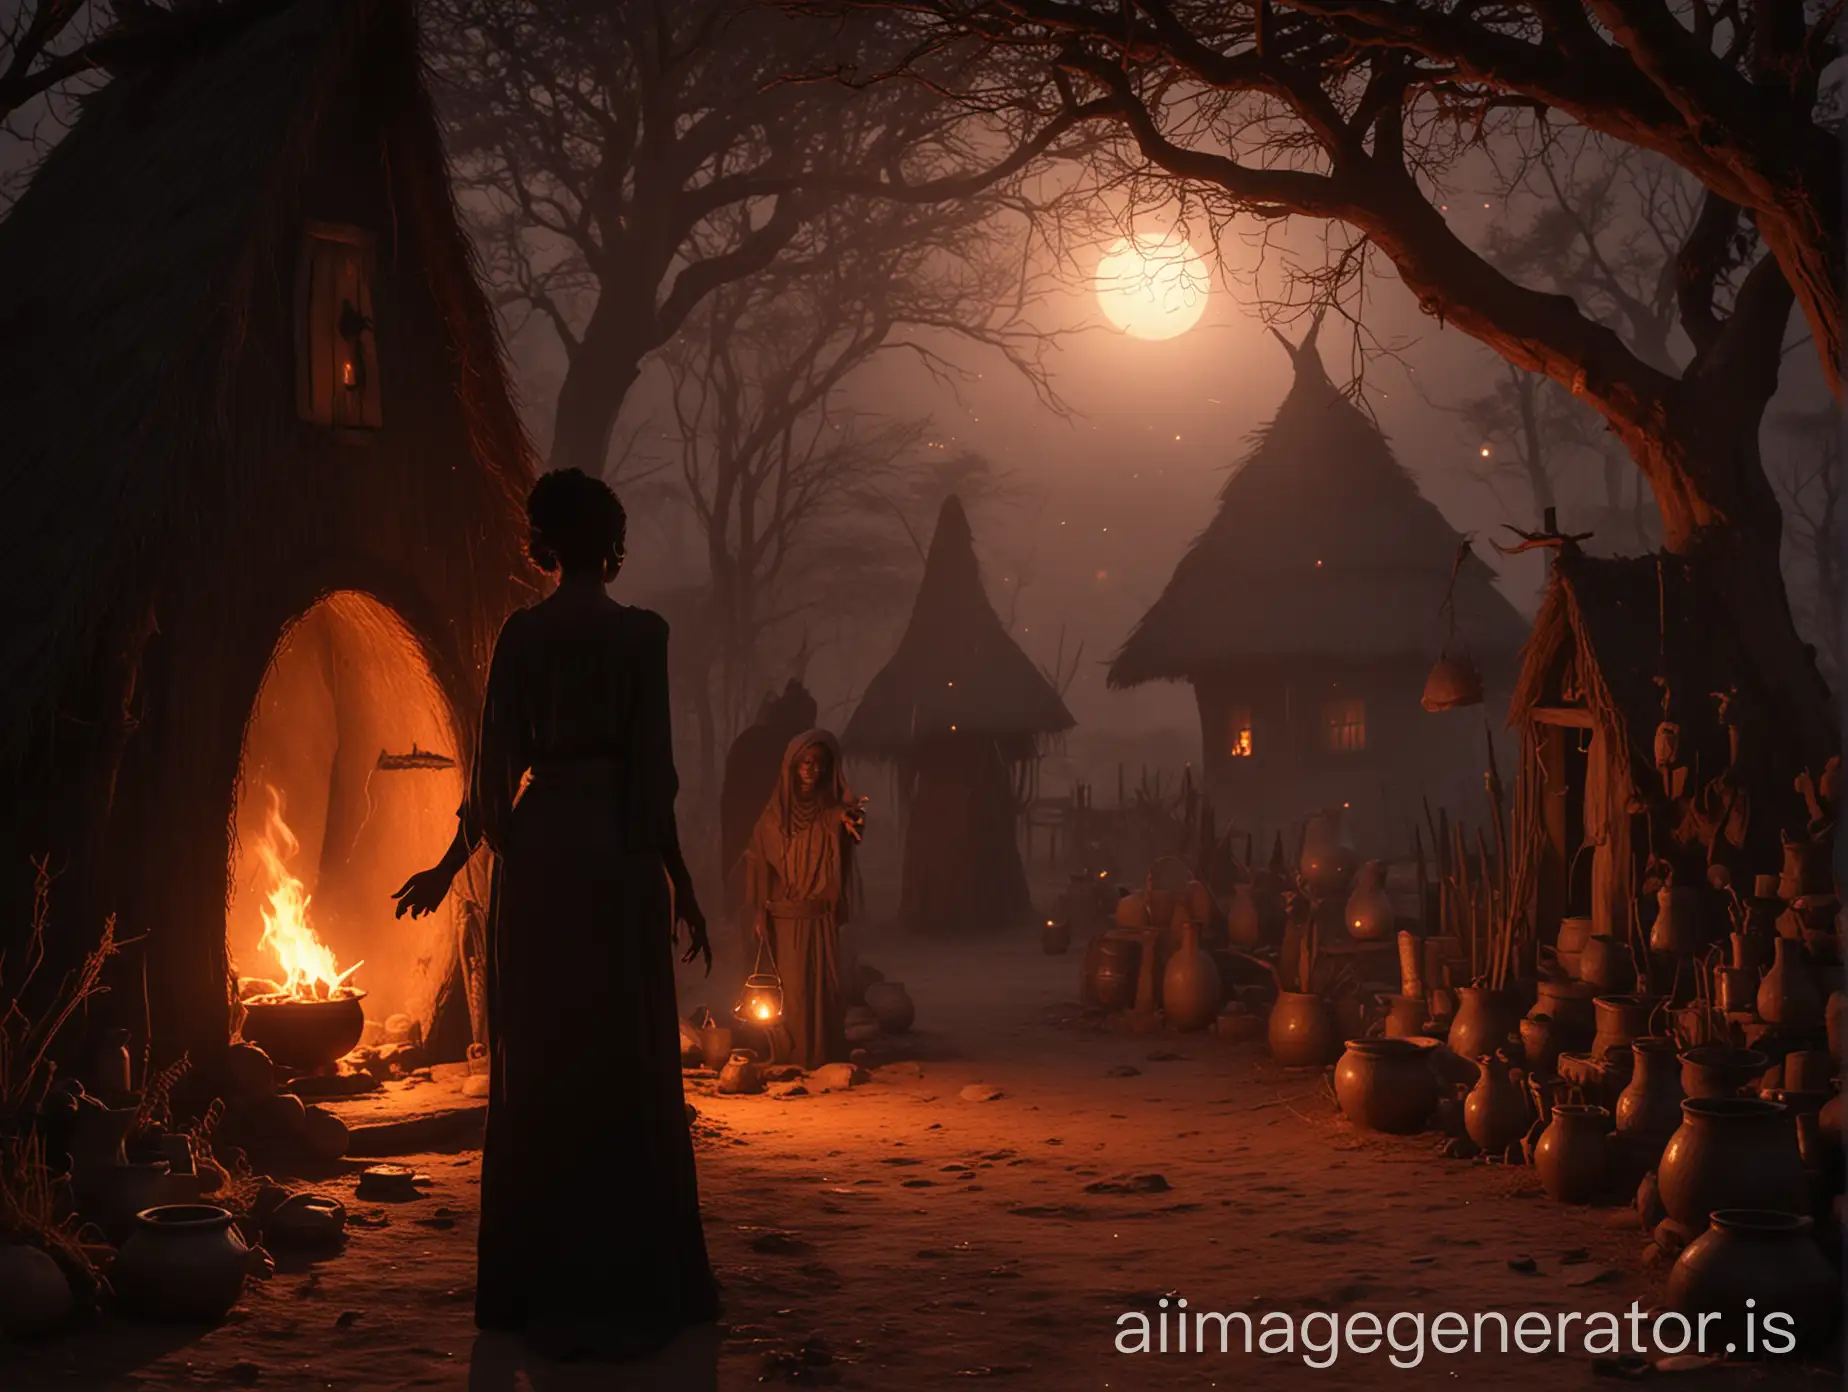 african black lady standing before the witch hut ,her hand outstretched to receive the potion, while the eerie glow of the witch cauldron illuminates the scene